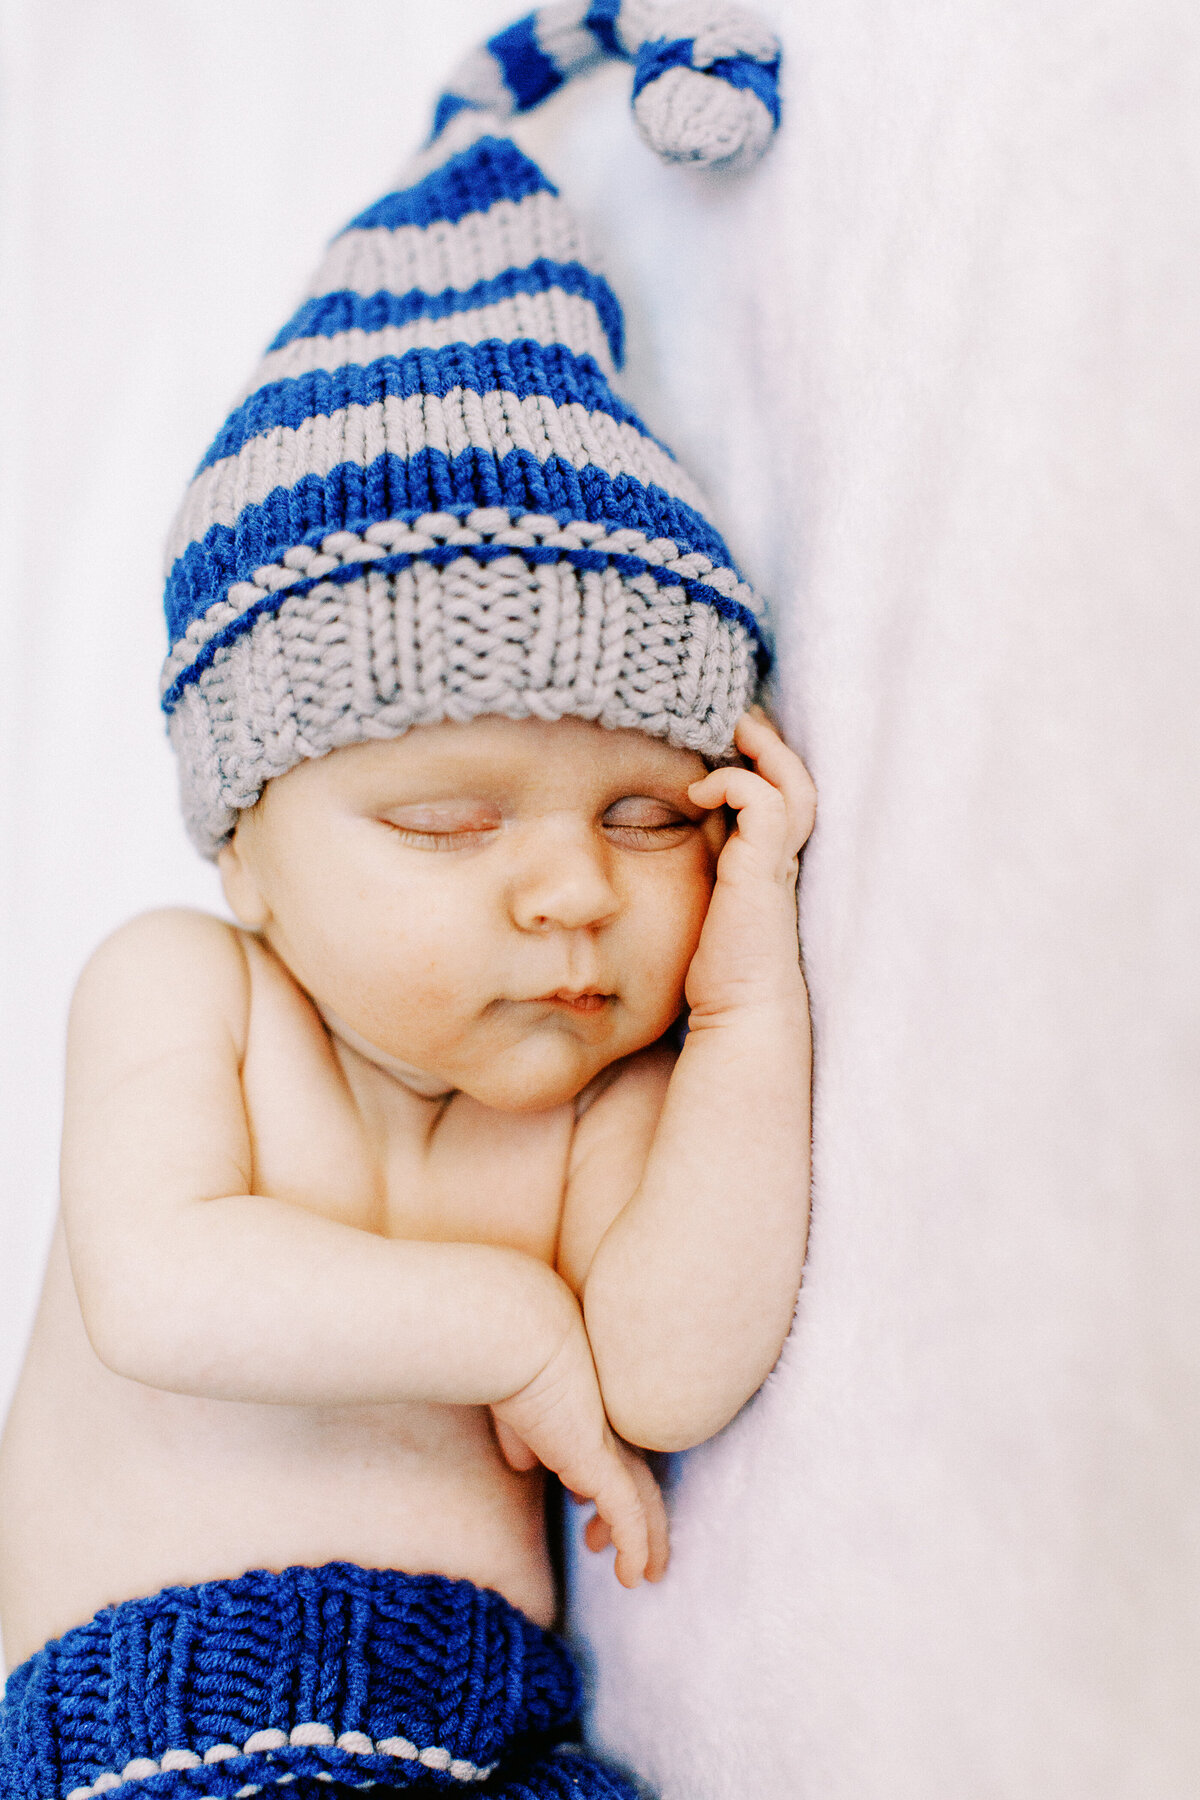 baby boy with blue and gray hat sleeps